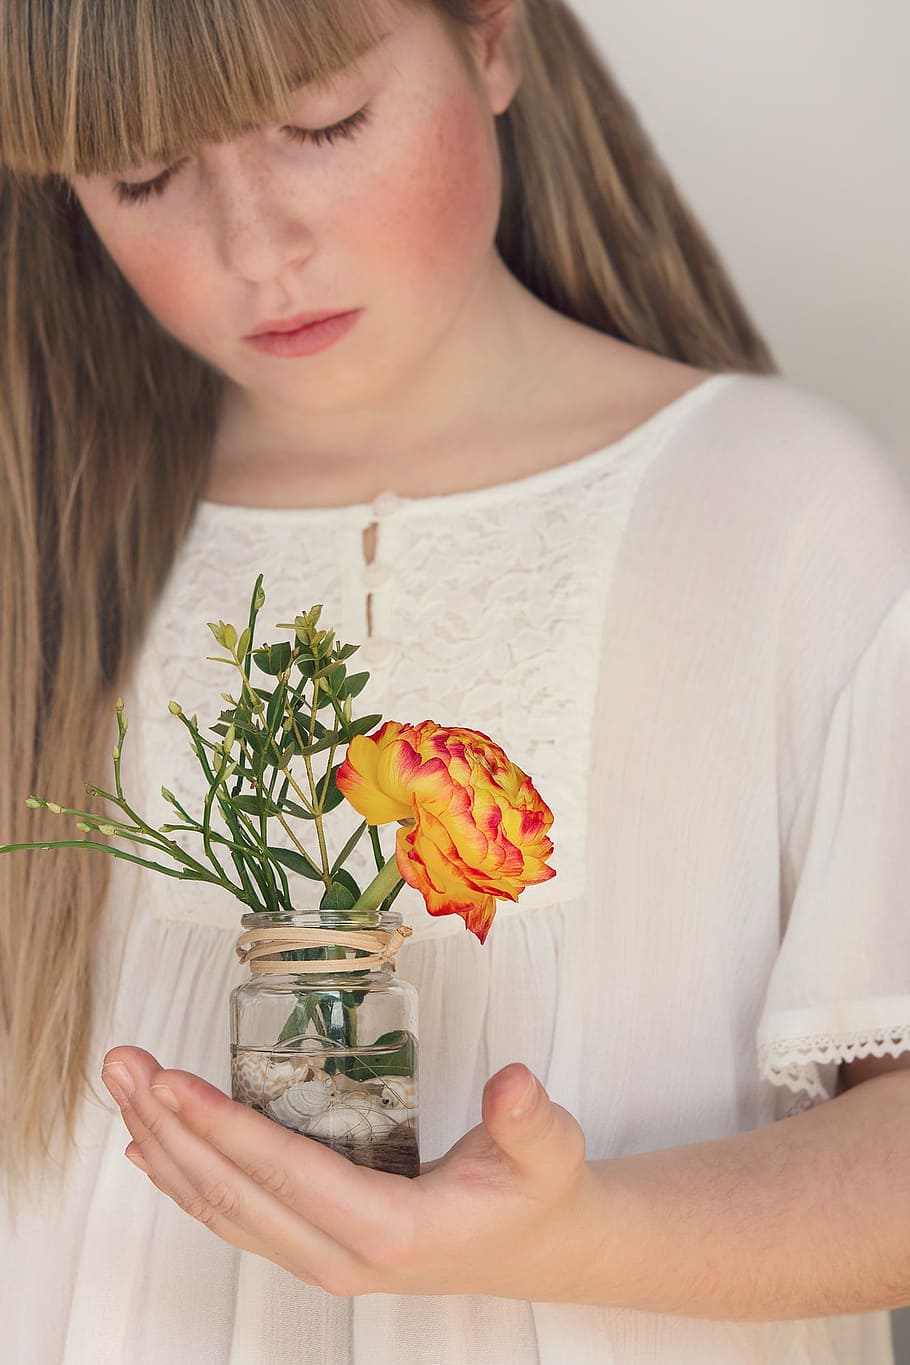 woman, holding, clear, glass jar, orange, red, ranunculus flower, flower, ranunculus, spring flower